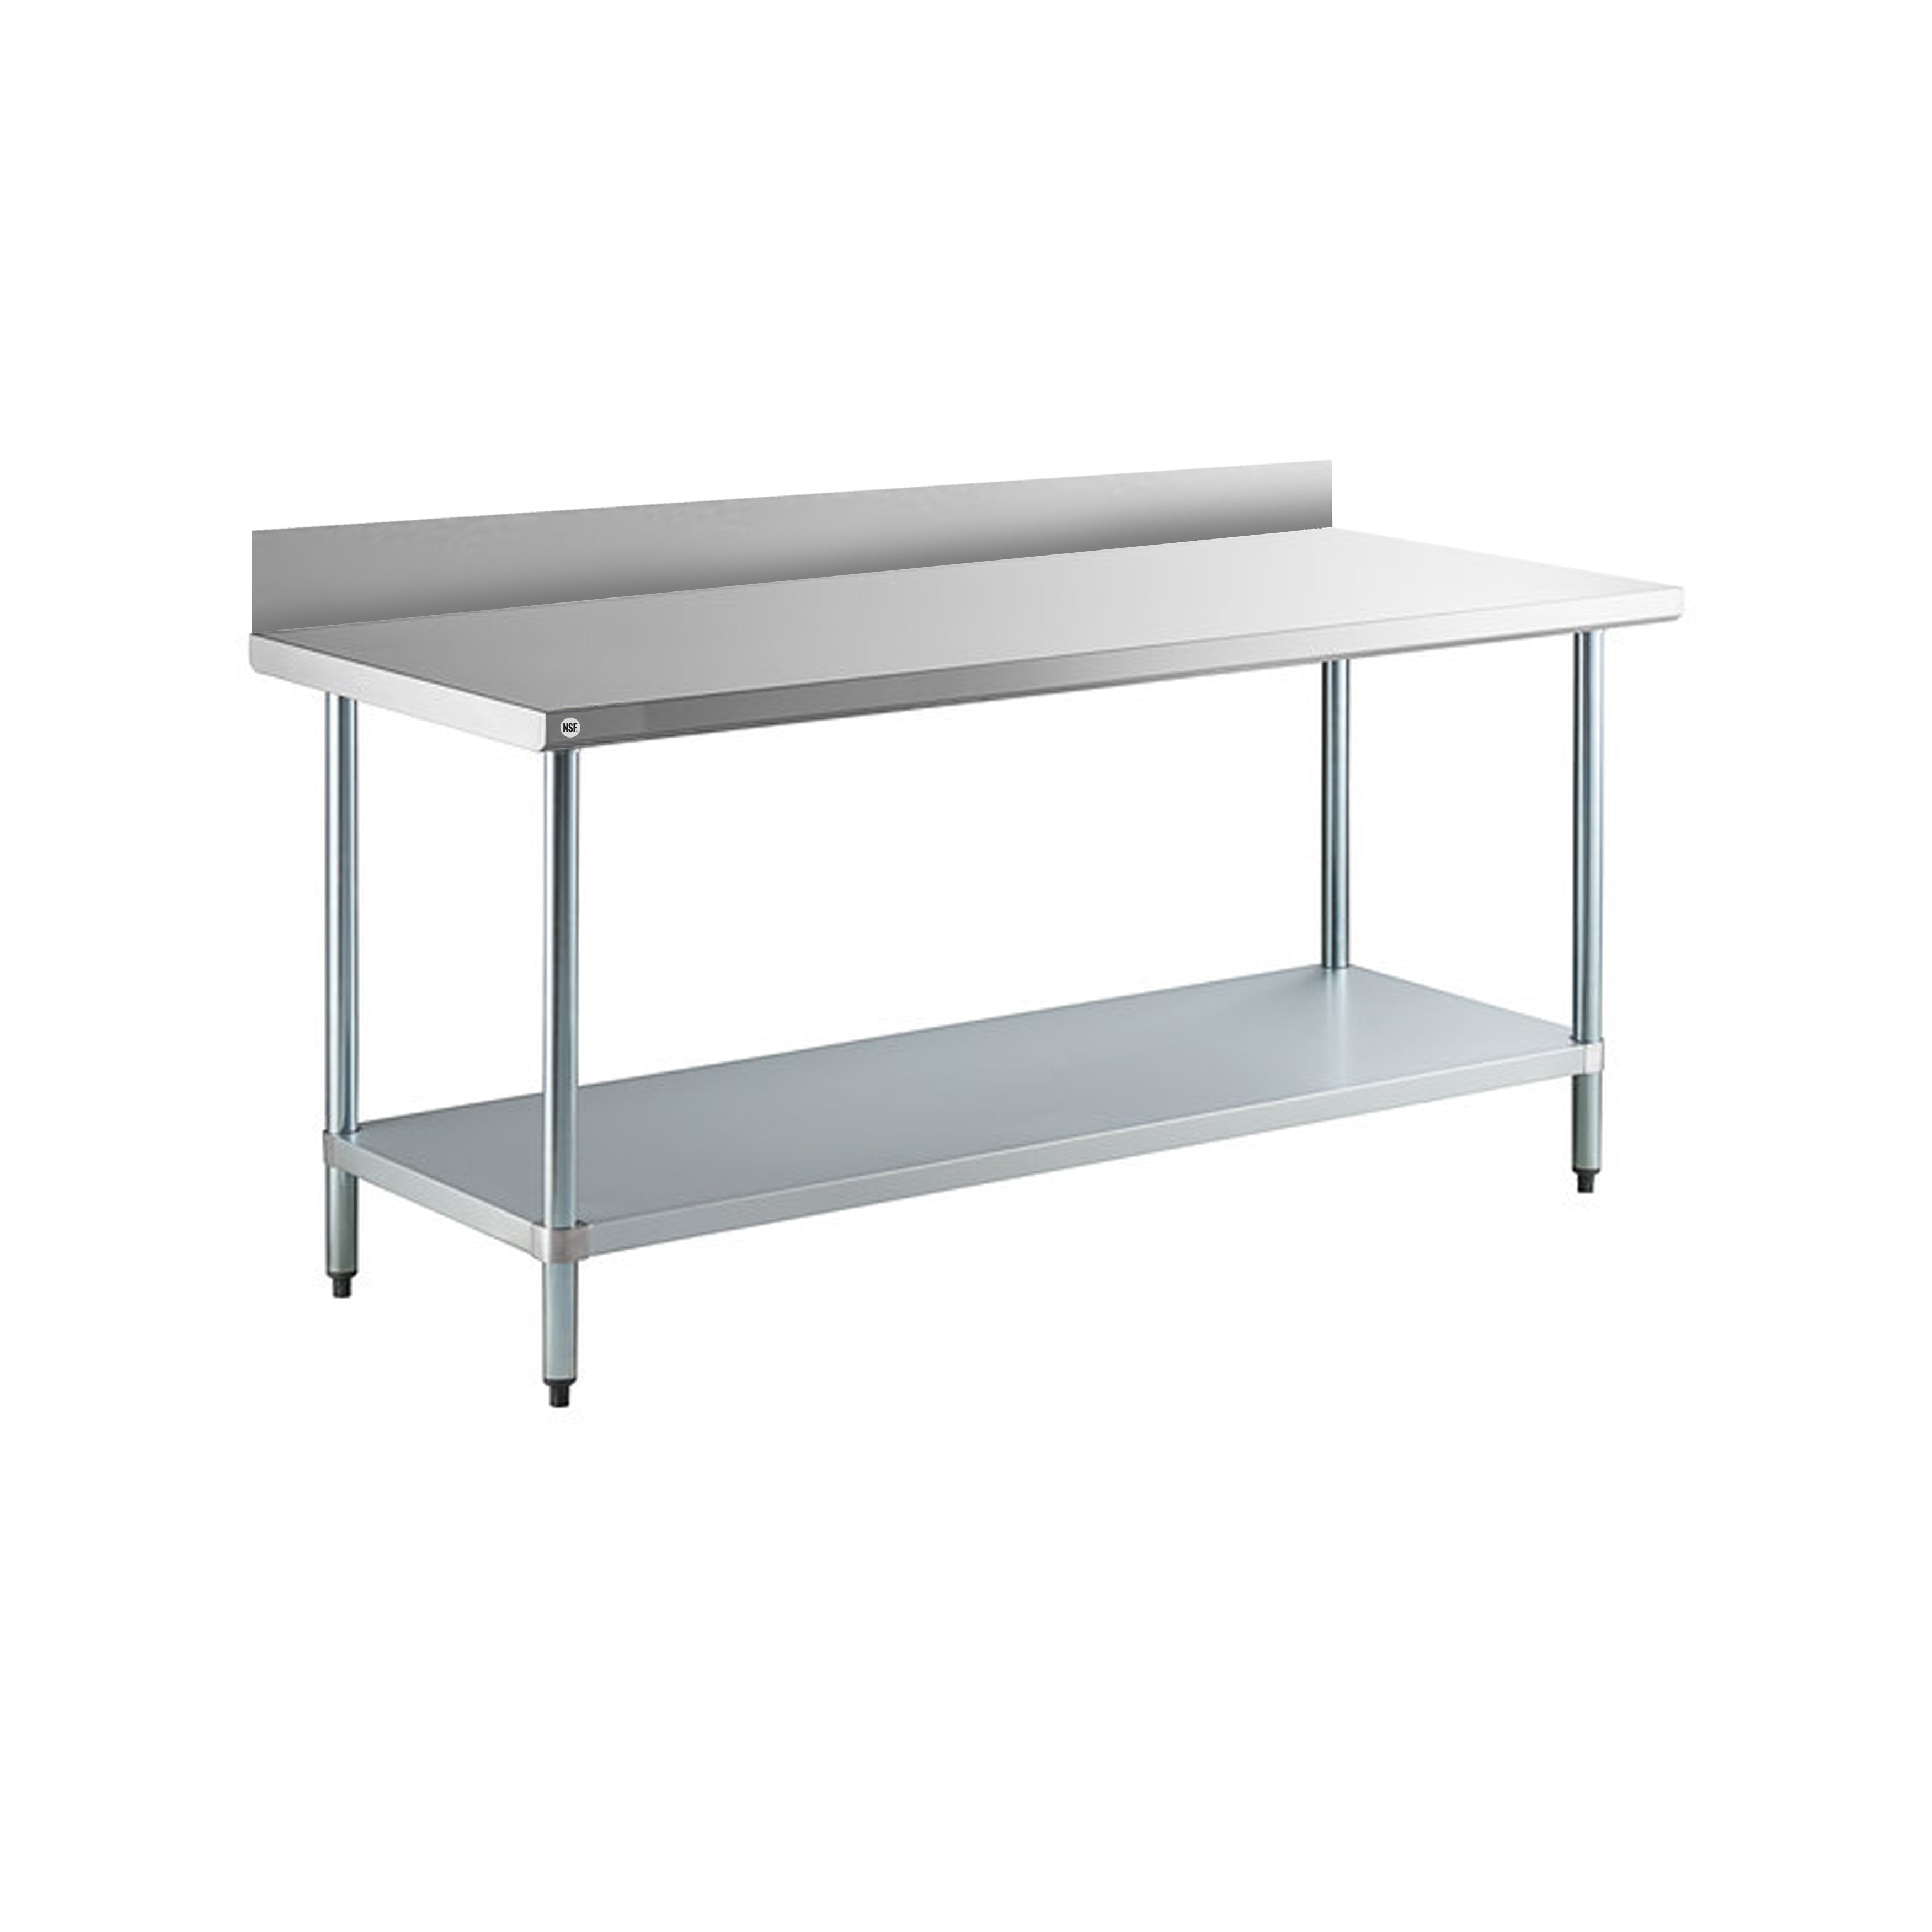 Omcan - 22089, Commercial 30" x 60" Stainless Steel Kitchen Work Table with 4" BackSplash 1200lbs Light Duty